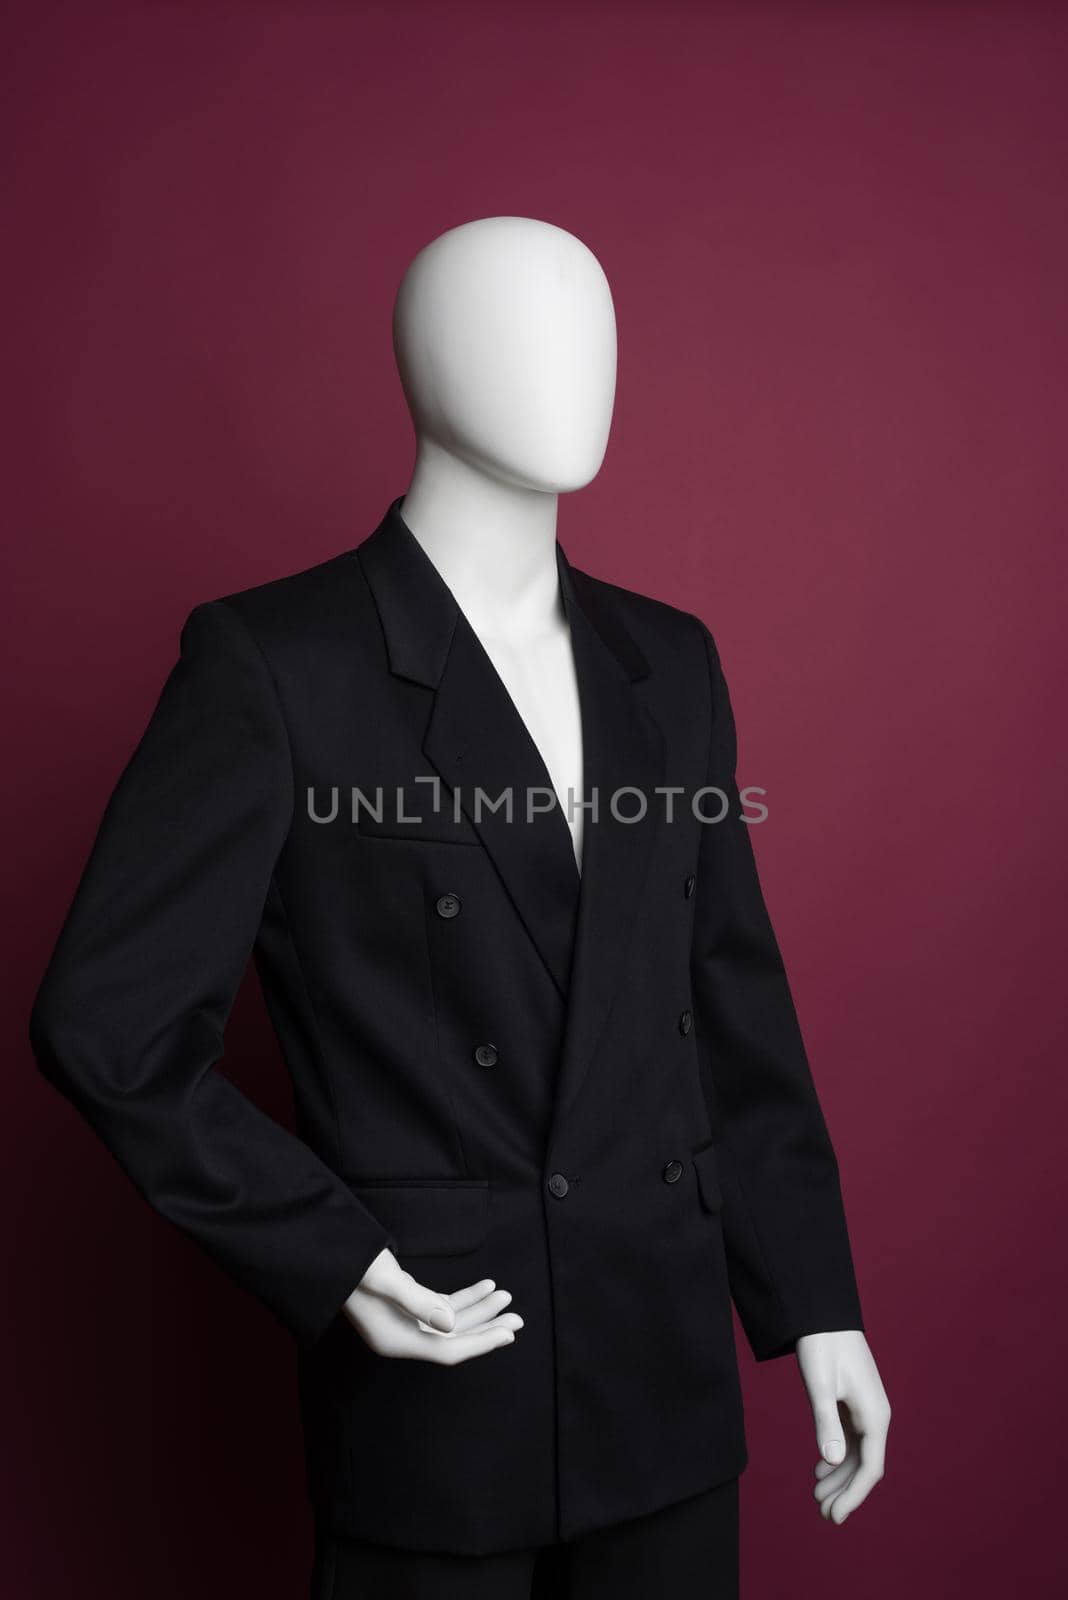 White male mannequin in a black business suit on a ruby background - image